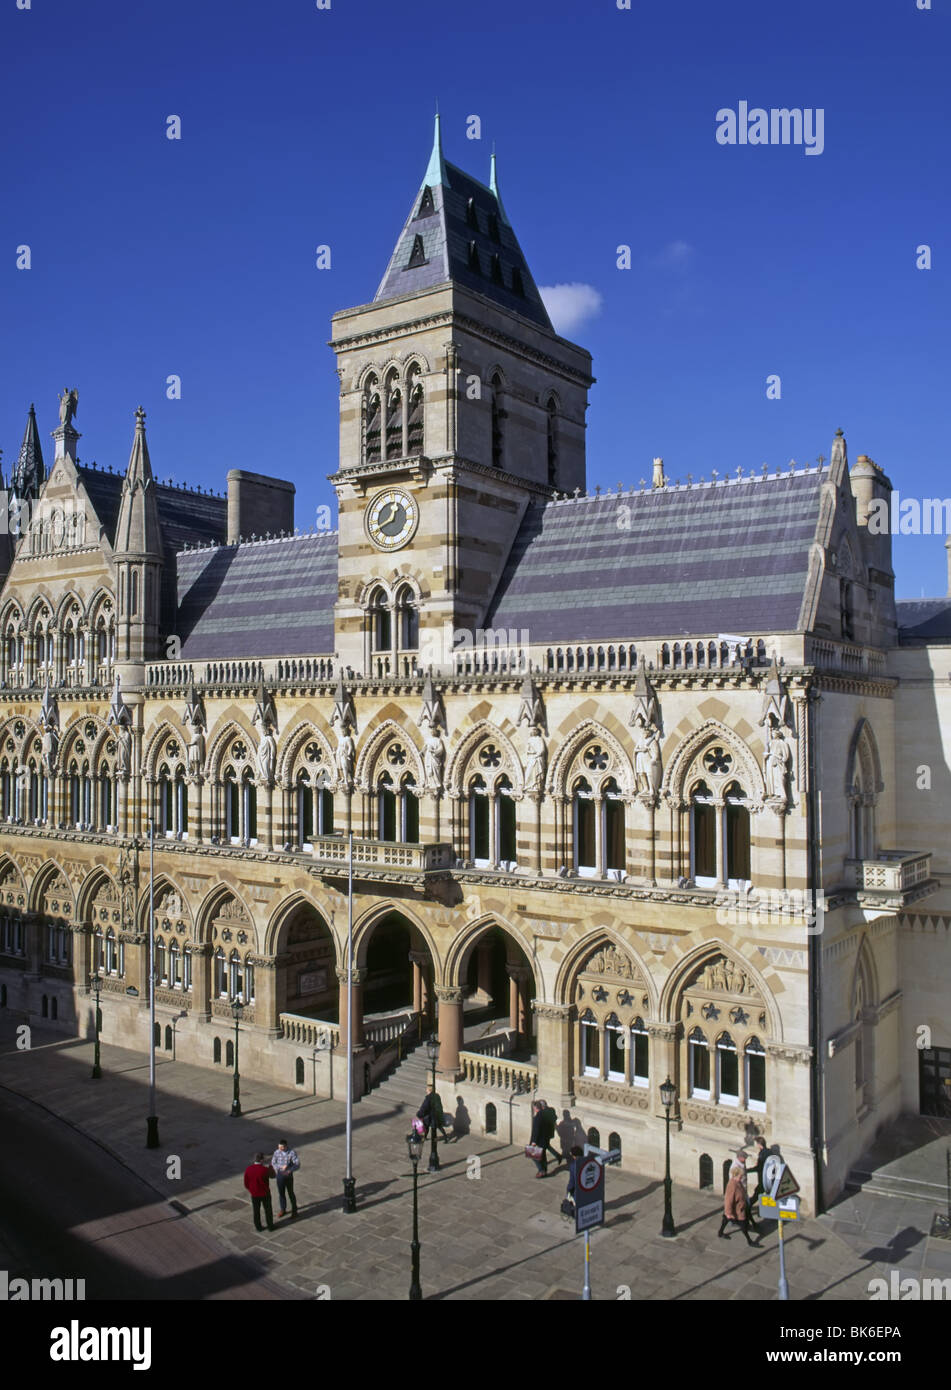 Historical Victorian 1800s Gothic Revival style façade of Northampton Guildhall a Grade II listed municipal building in Northamptonshire England UK Stock Photo